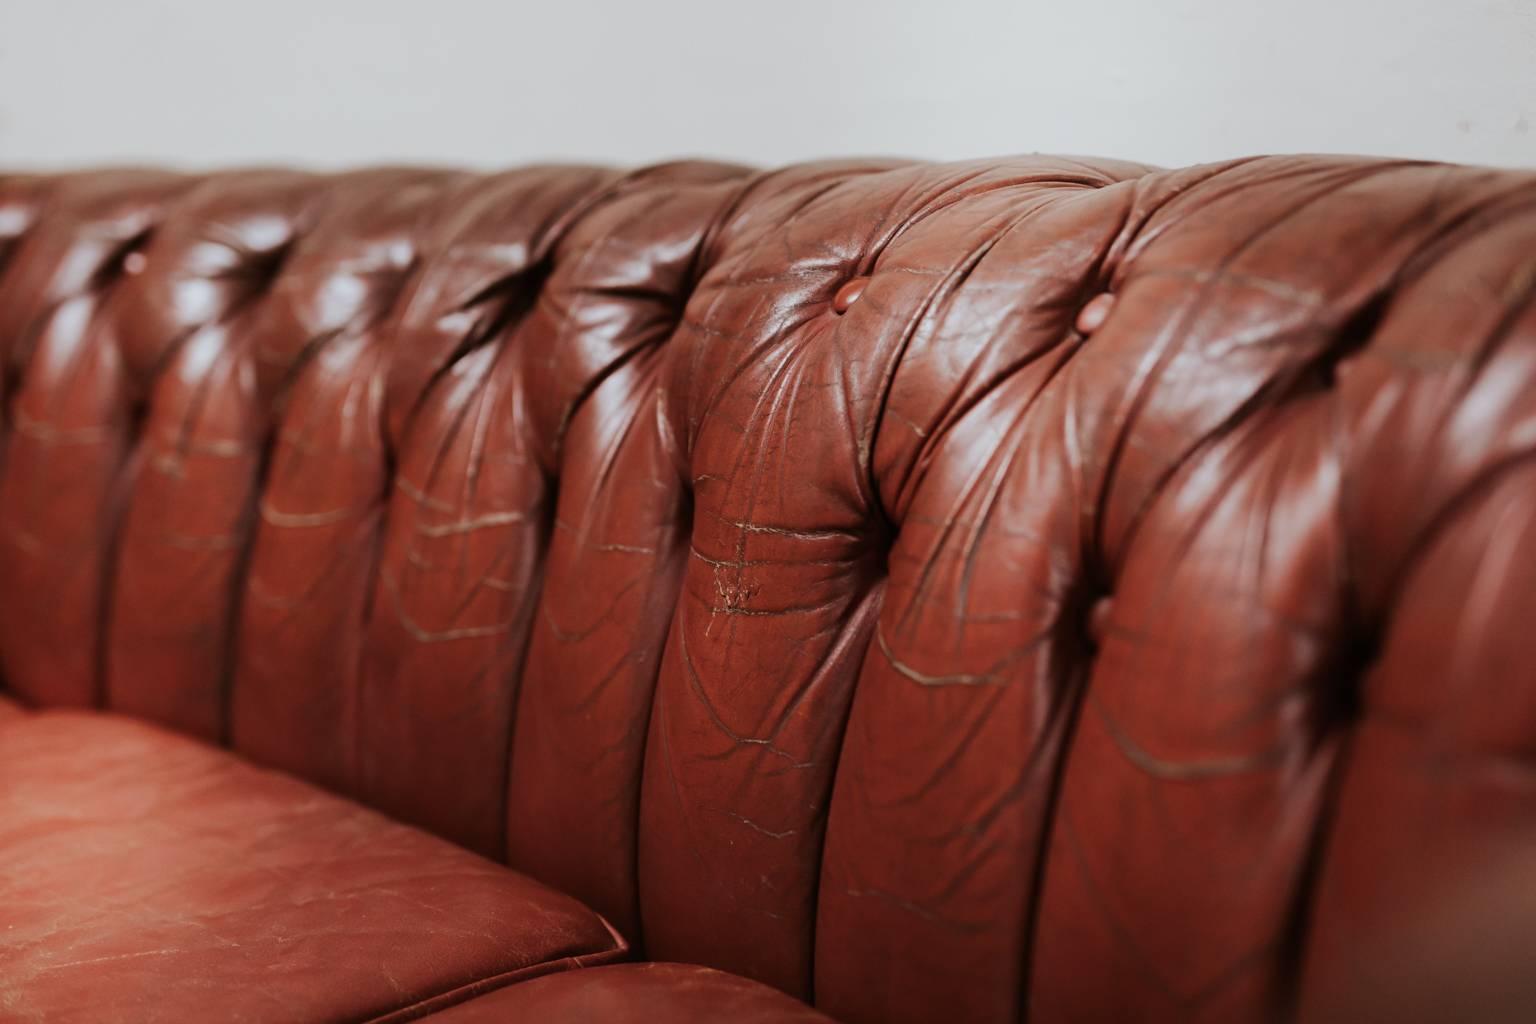 It is all about the crescent moon shape of this chesterfield, great patina on the red leather as well.